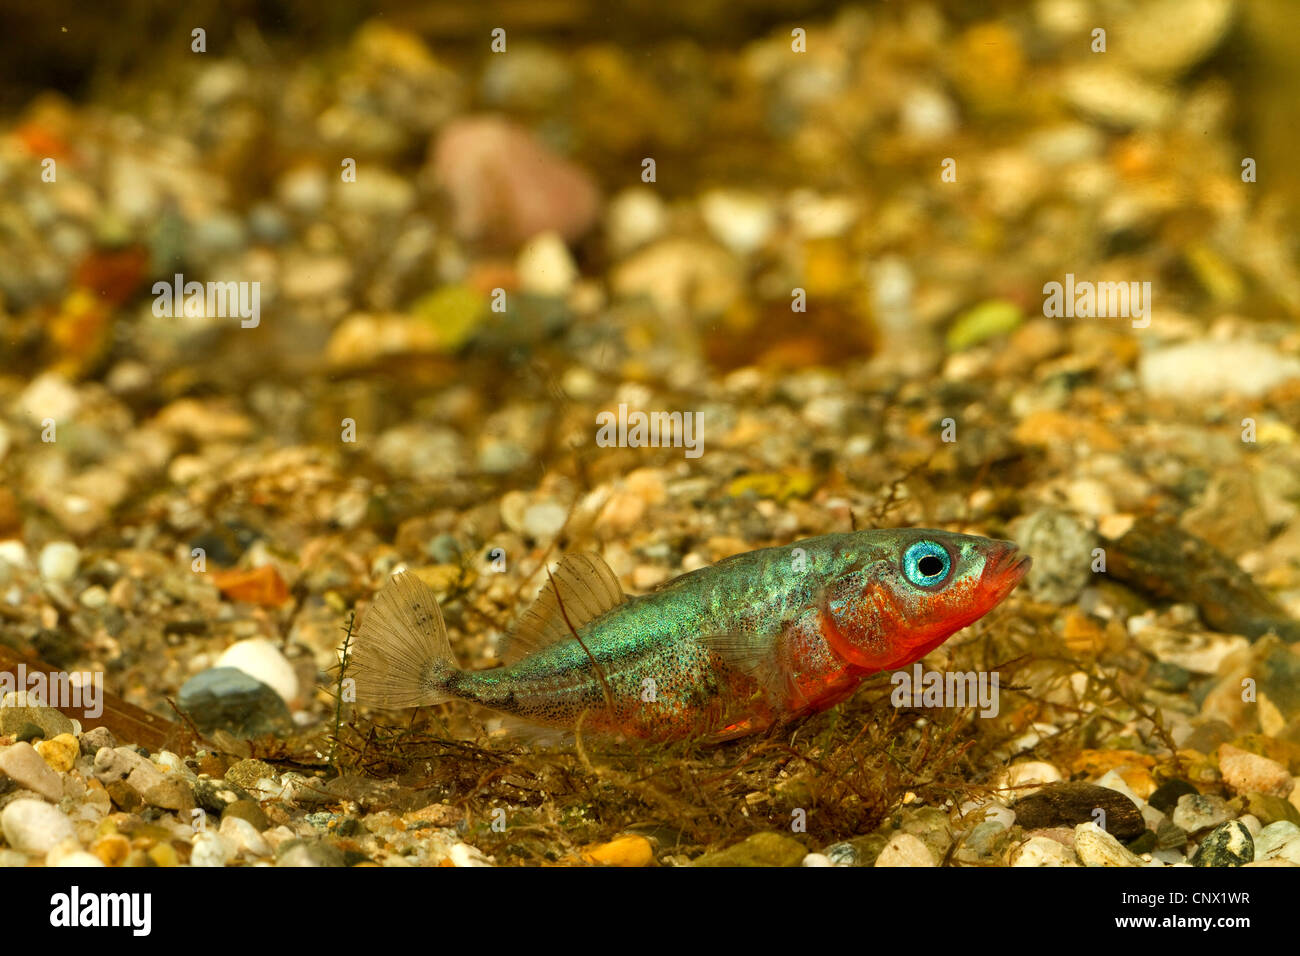 three-spined stickleback (Gasterosteus aculeatus), male building a nest, sticking nesting material together, Germany Stock Photo